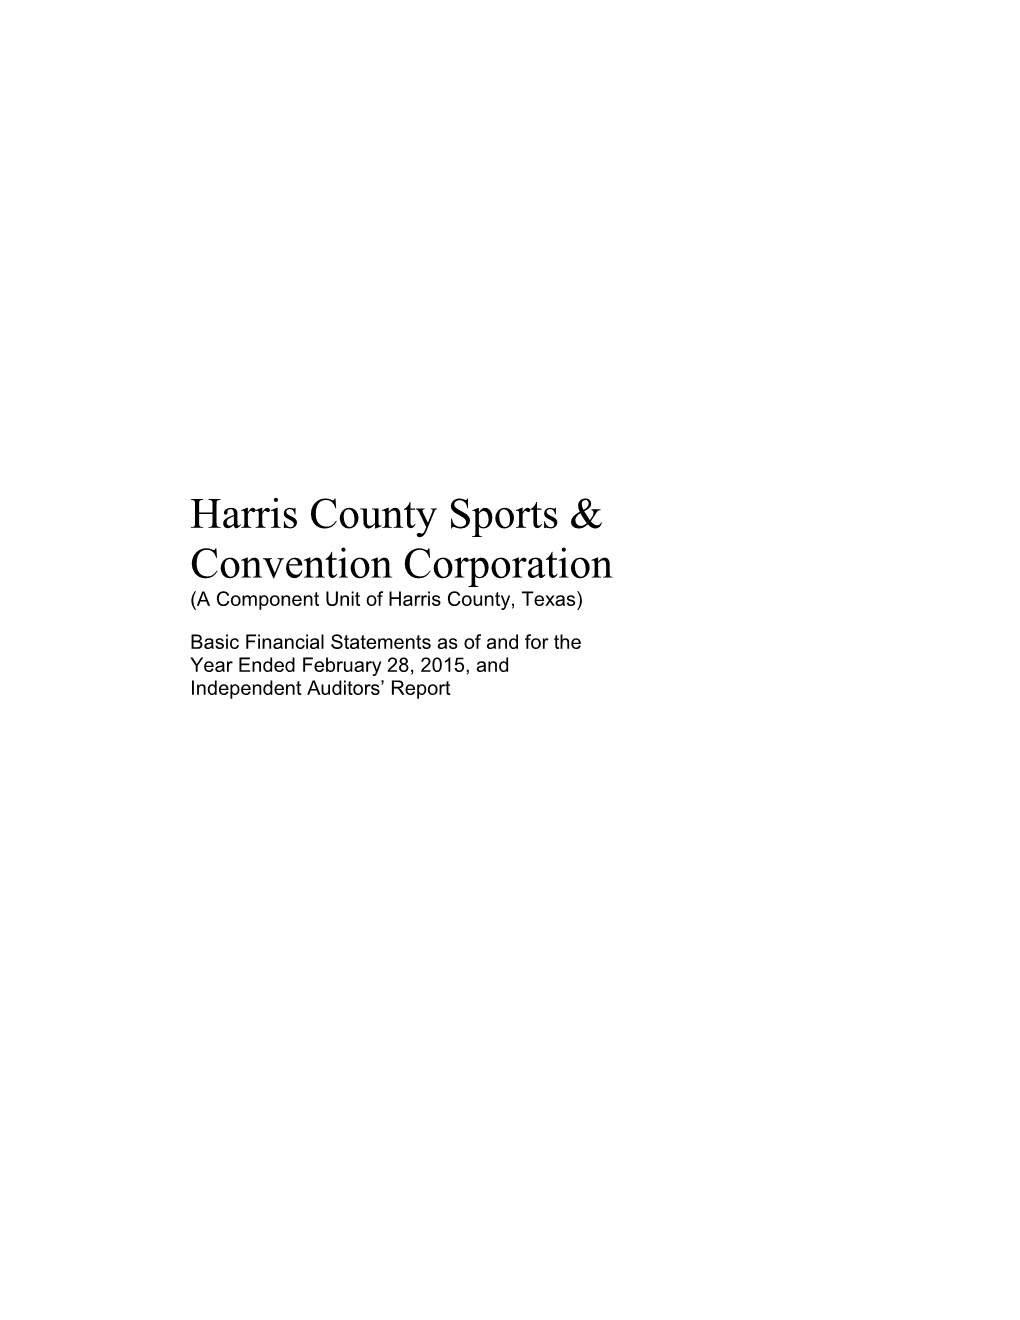 Harris County Sports & Convention Corporation